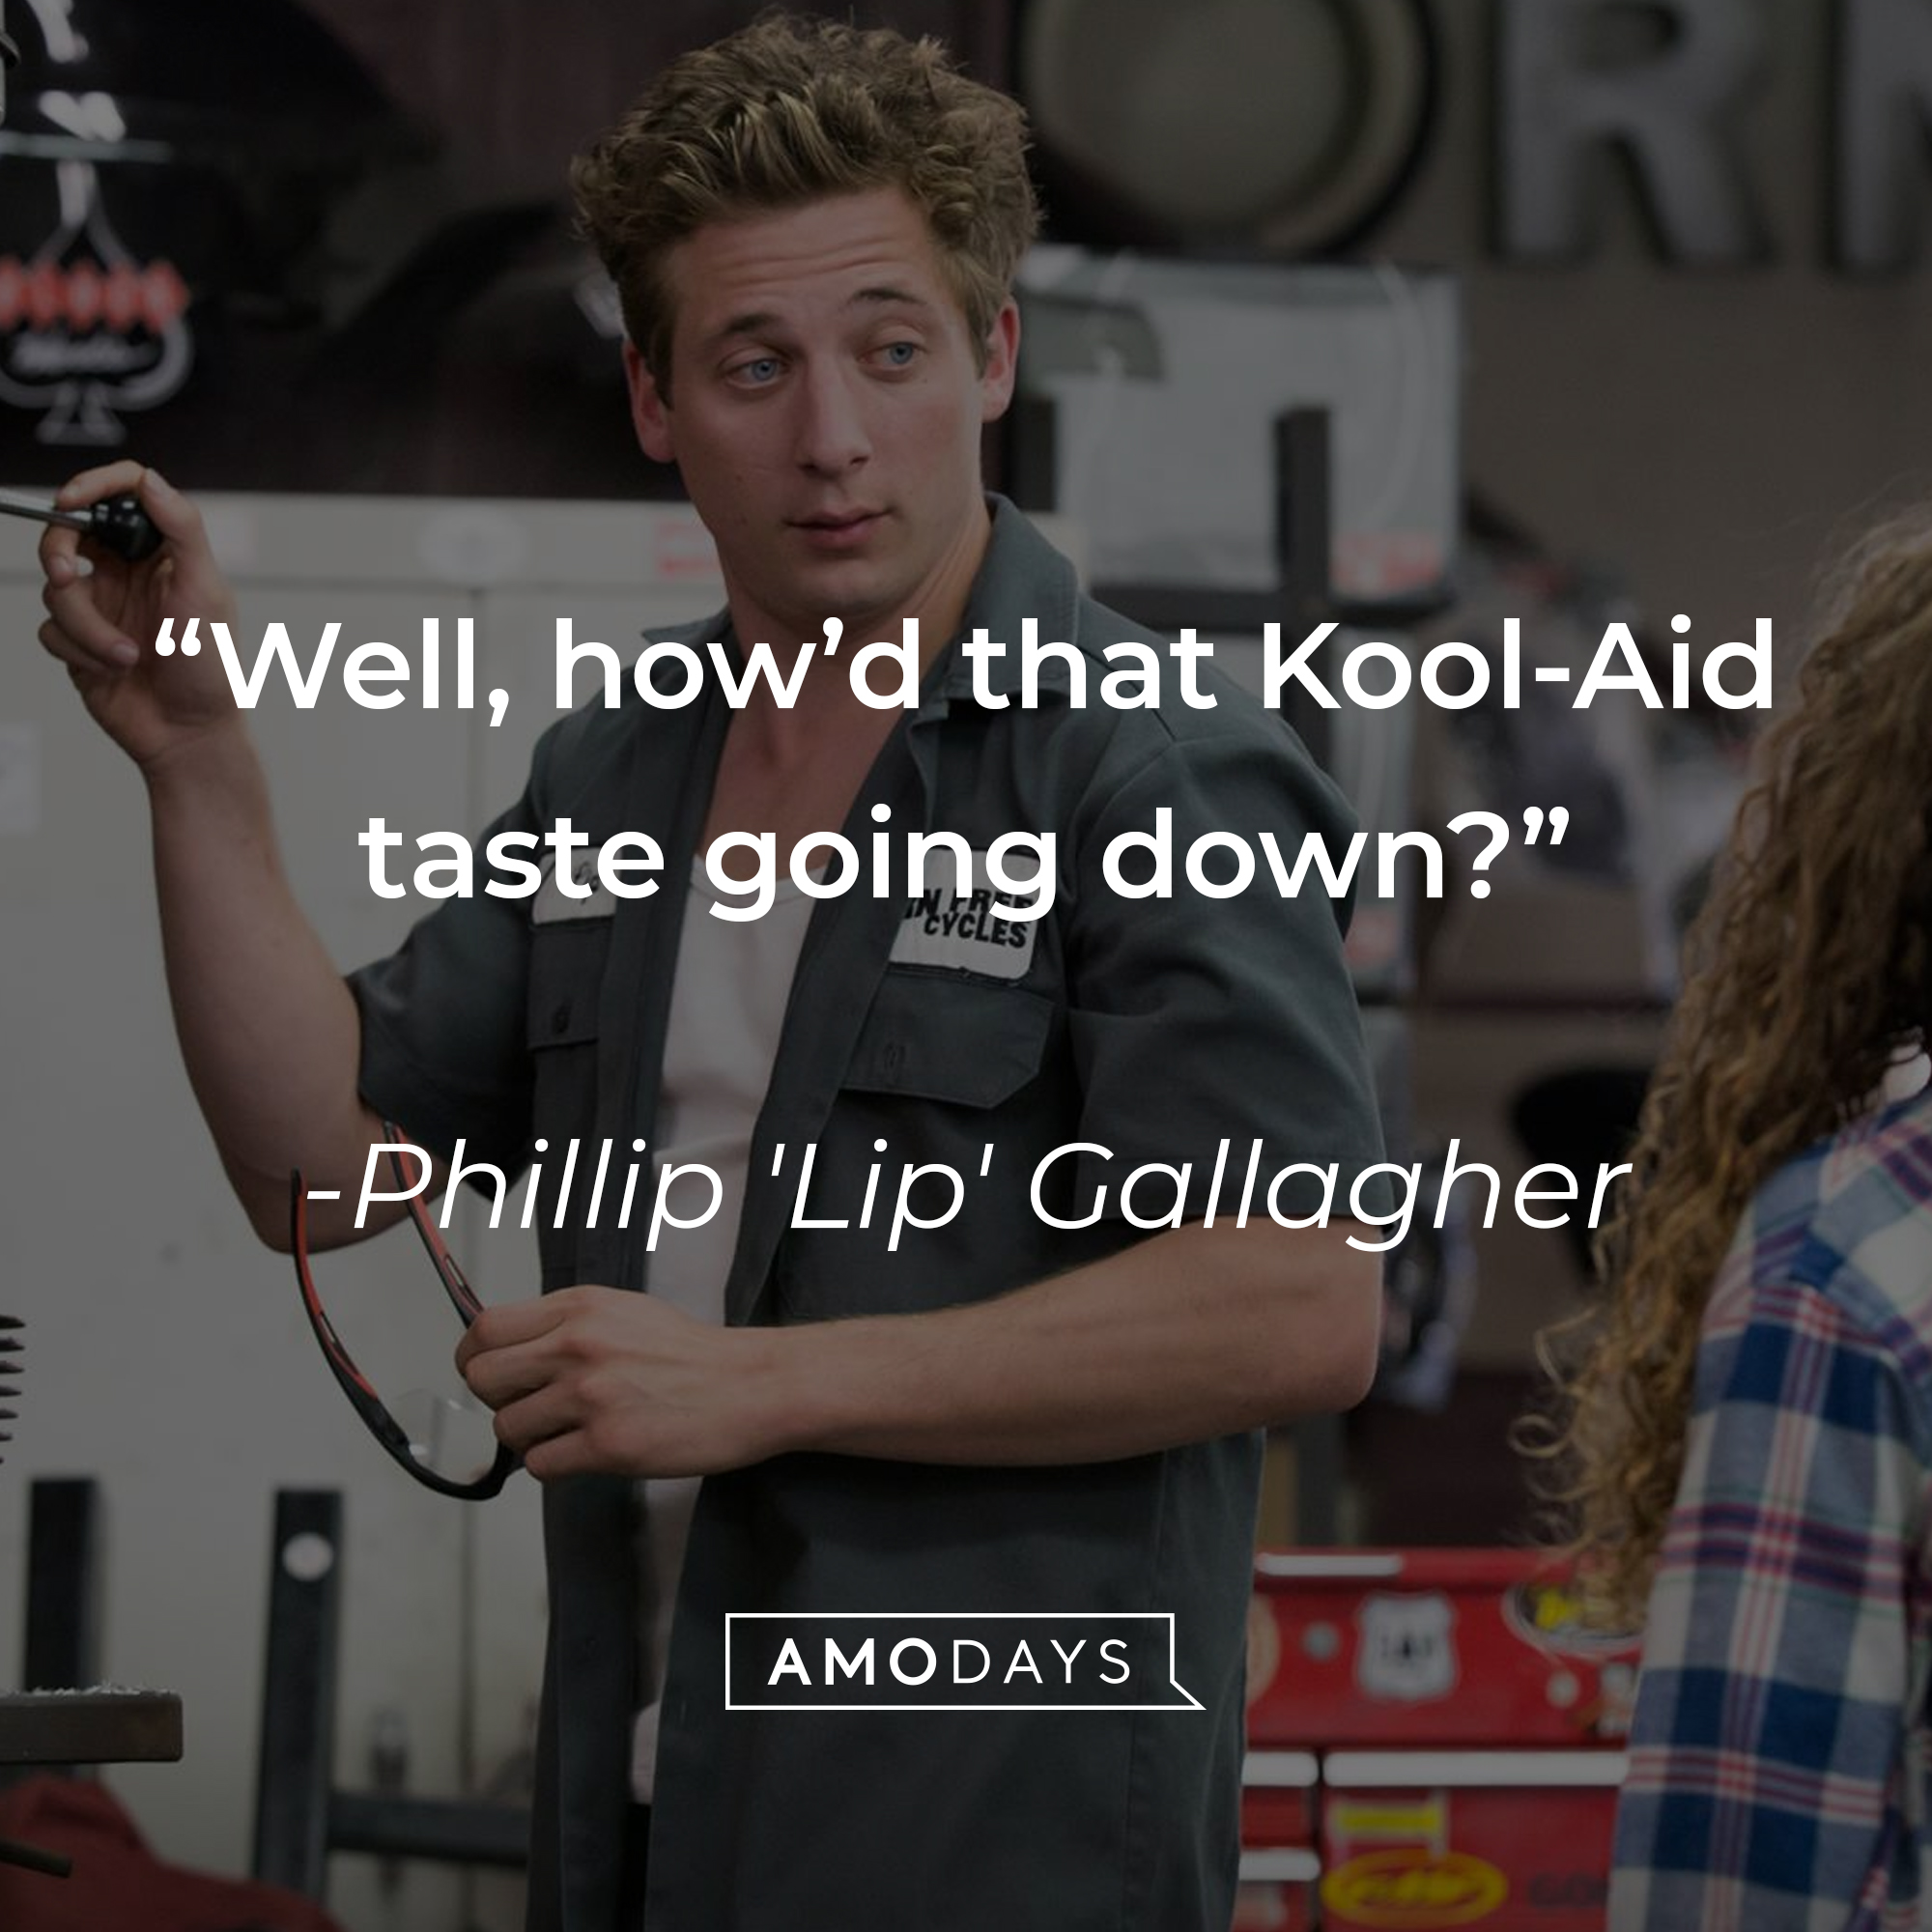 Phillip 'Lip' Gallagher with his quote: “Well, how’d that Kool-Aid taste going down?” | Source: facebook.com/ShamelessOnShowtime